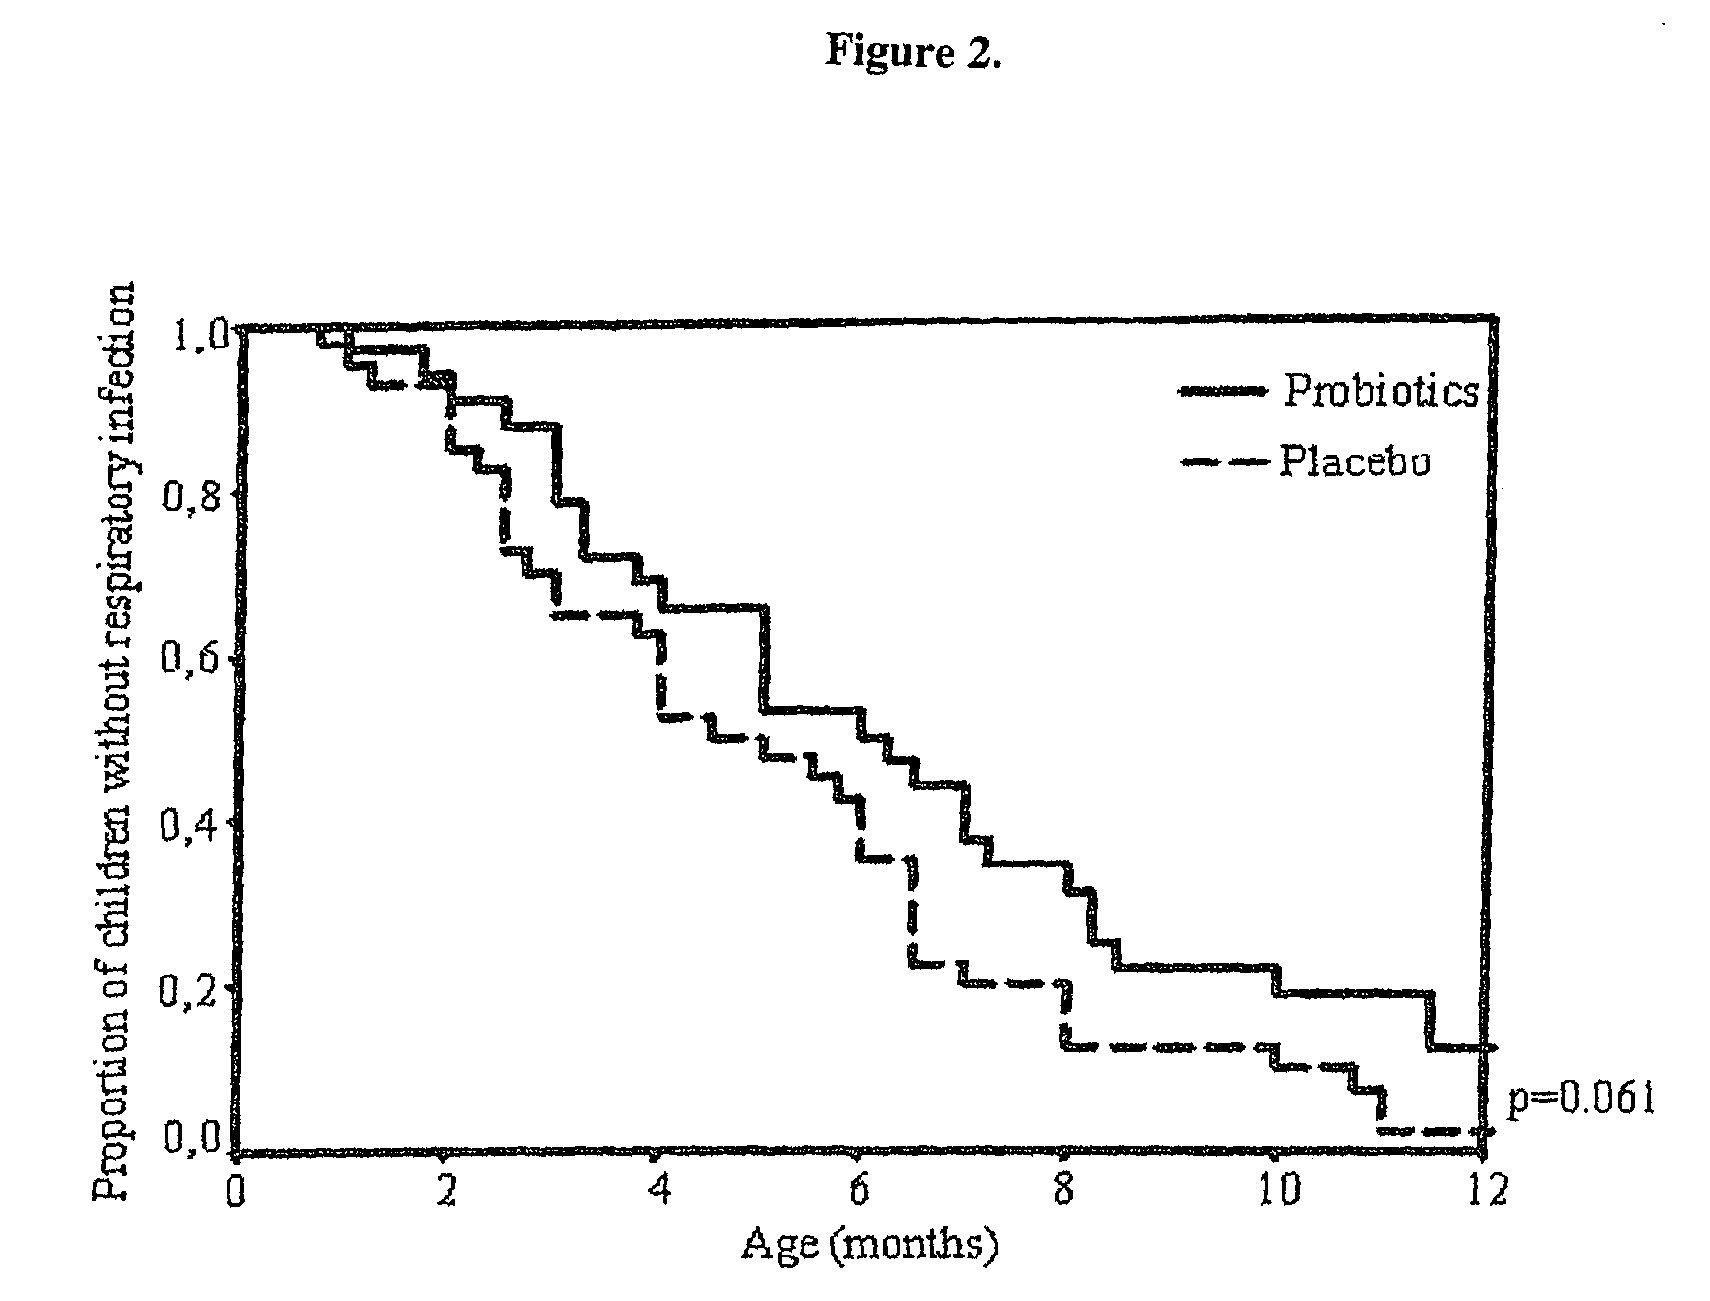 Method for preventing or treating respiratory infections and acute otitis media in infants using <i>Lactobacillus rhamnosus </i>LGG and <i>Bifidobacterium lactis </i>Bb-12